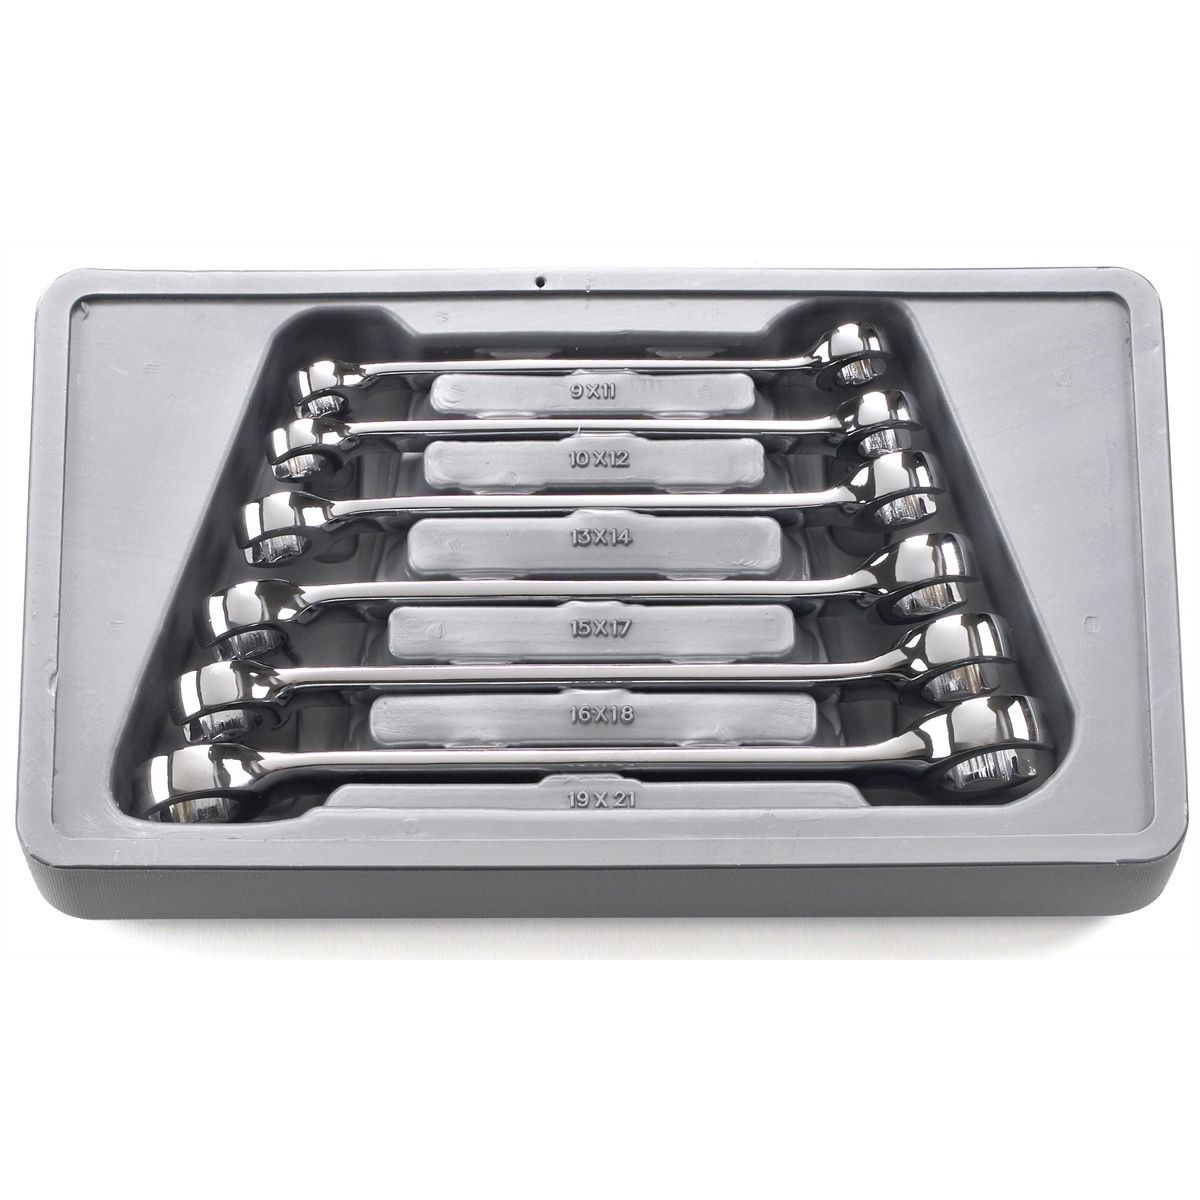 Long Pattern Metric Flare Nut Wrench Set - 6-Pc